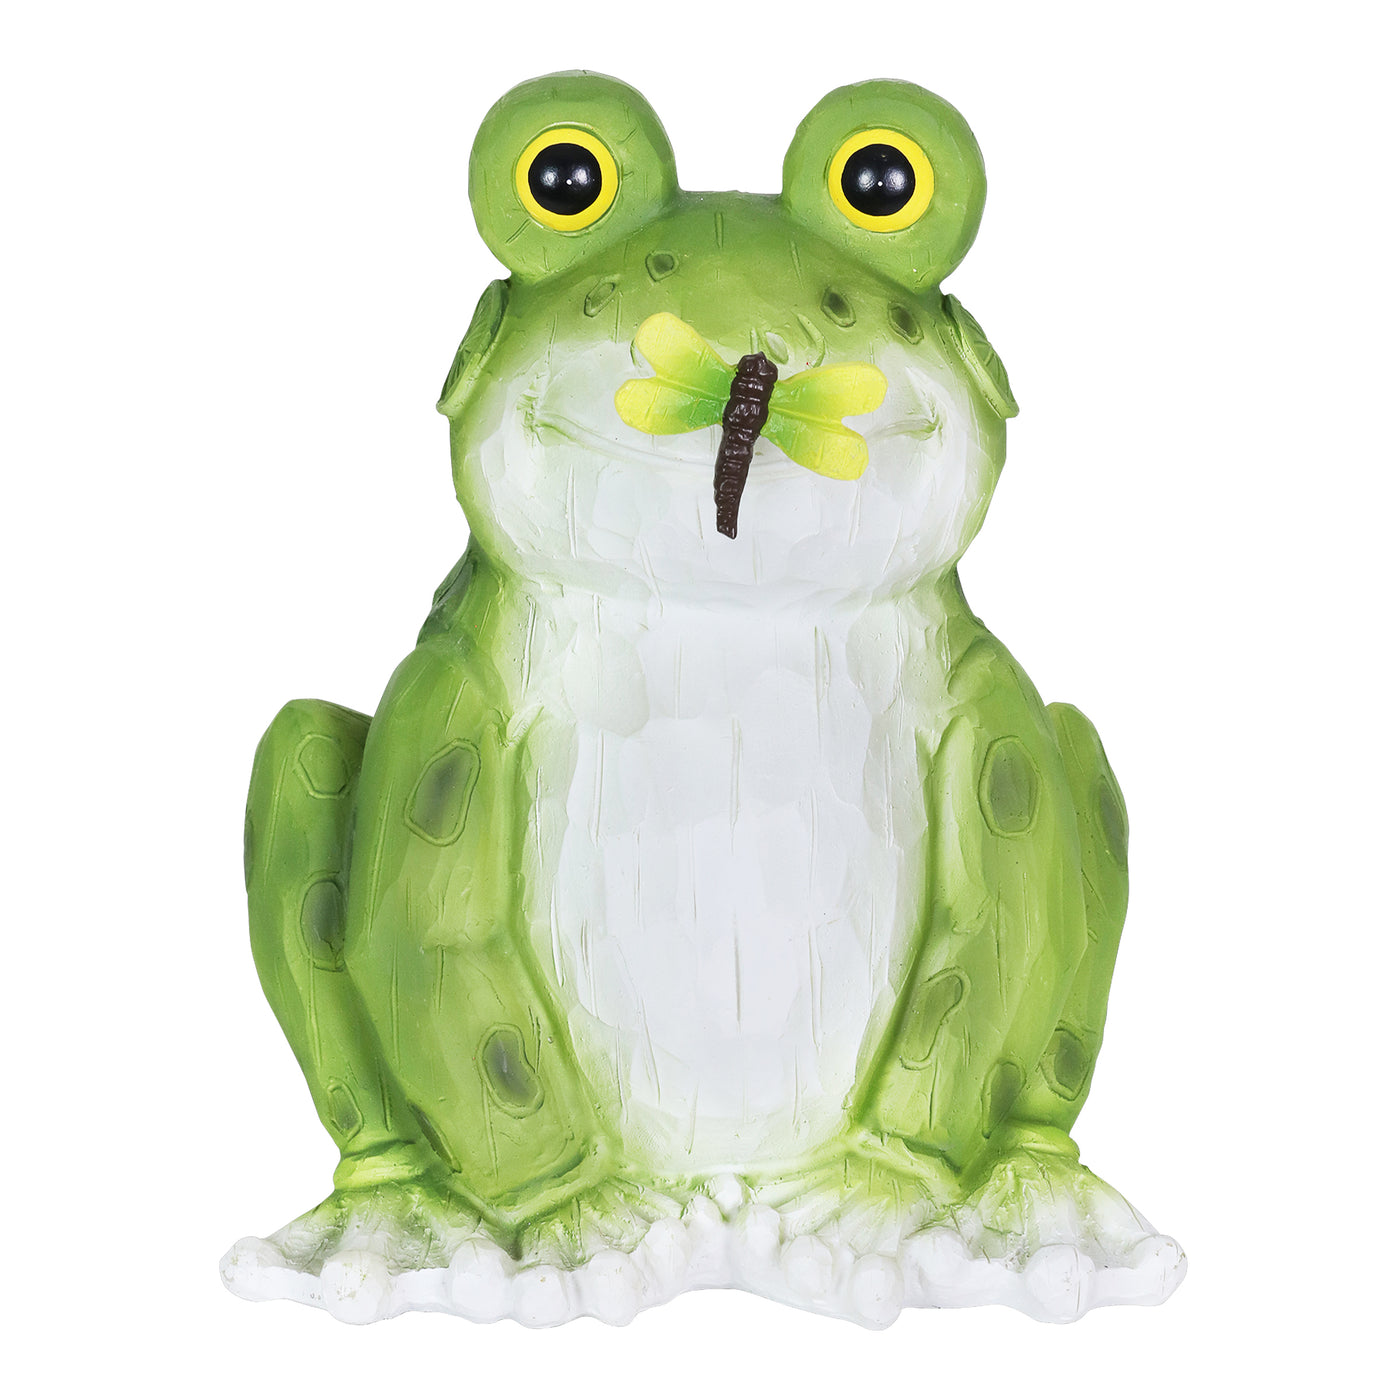 Exhart Solar Frog with LED Flower Garden Statuary, 8 Inches tall & Reviews